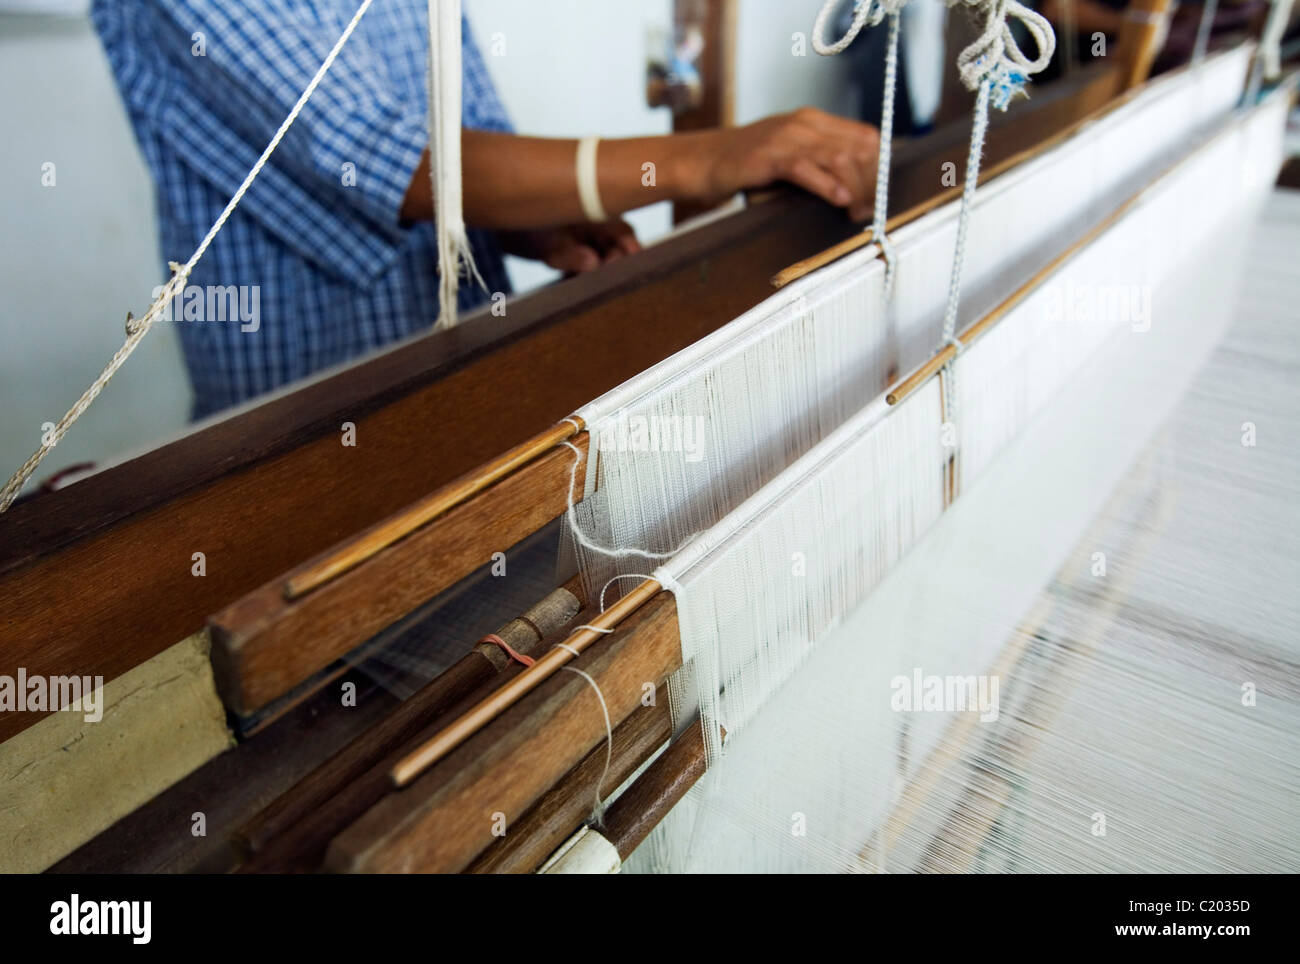 A man works a hand loom to produce silk material at Pak Thong Chai, near Phimai, Nakhon Ratchasima province, THAILAND. Stock Photo